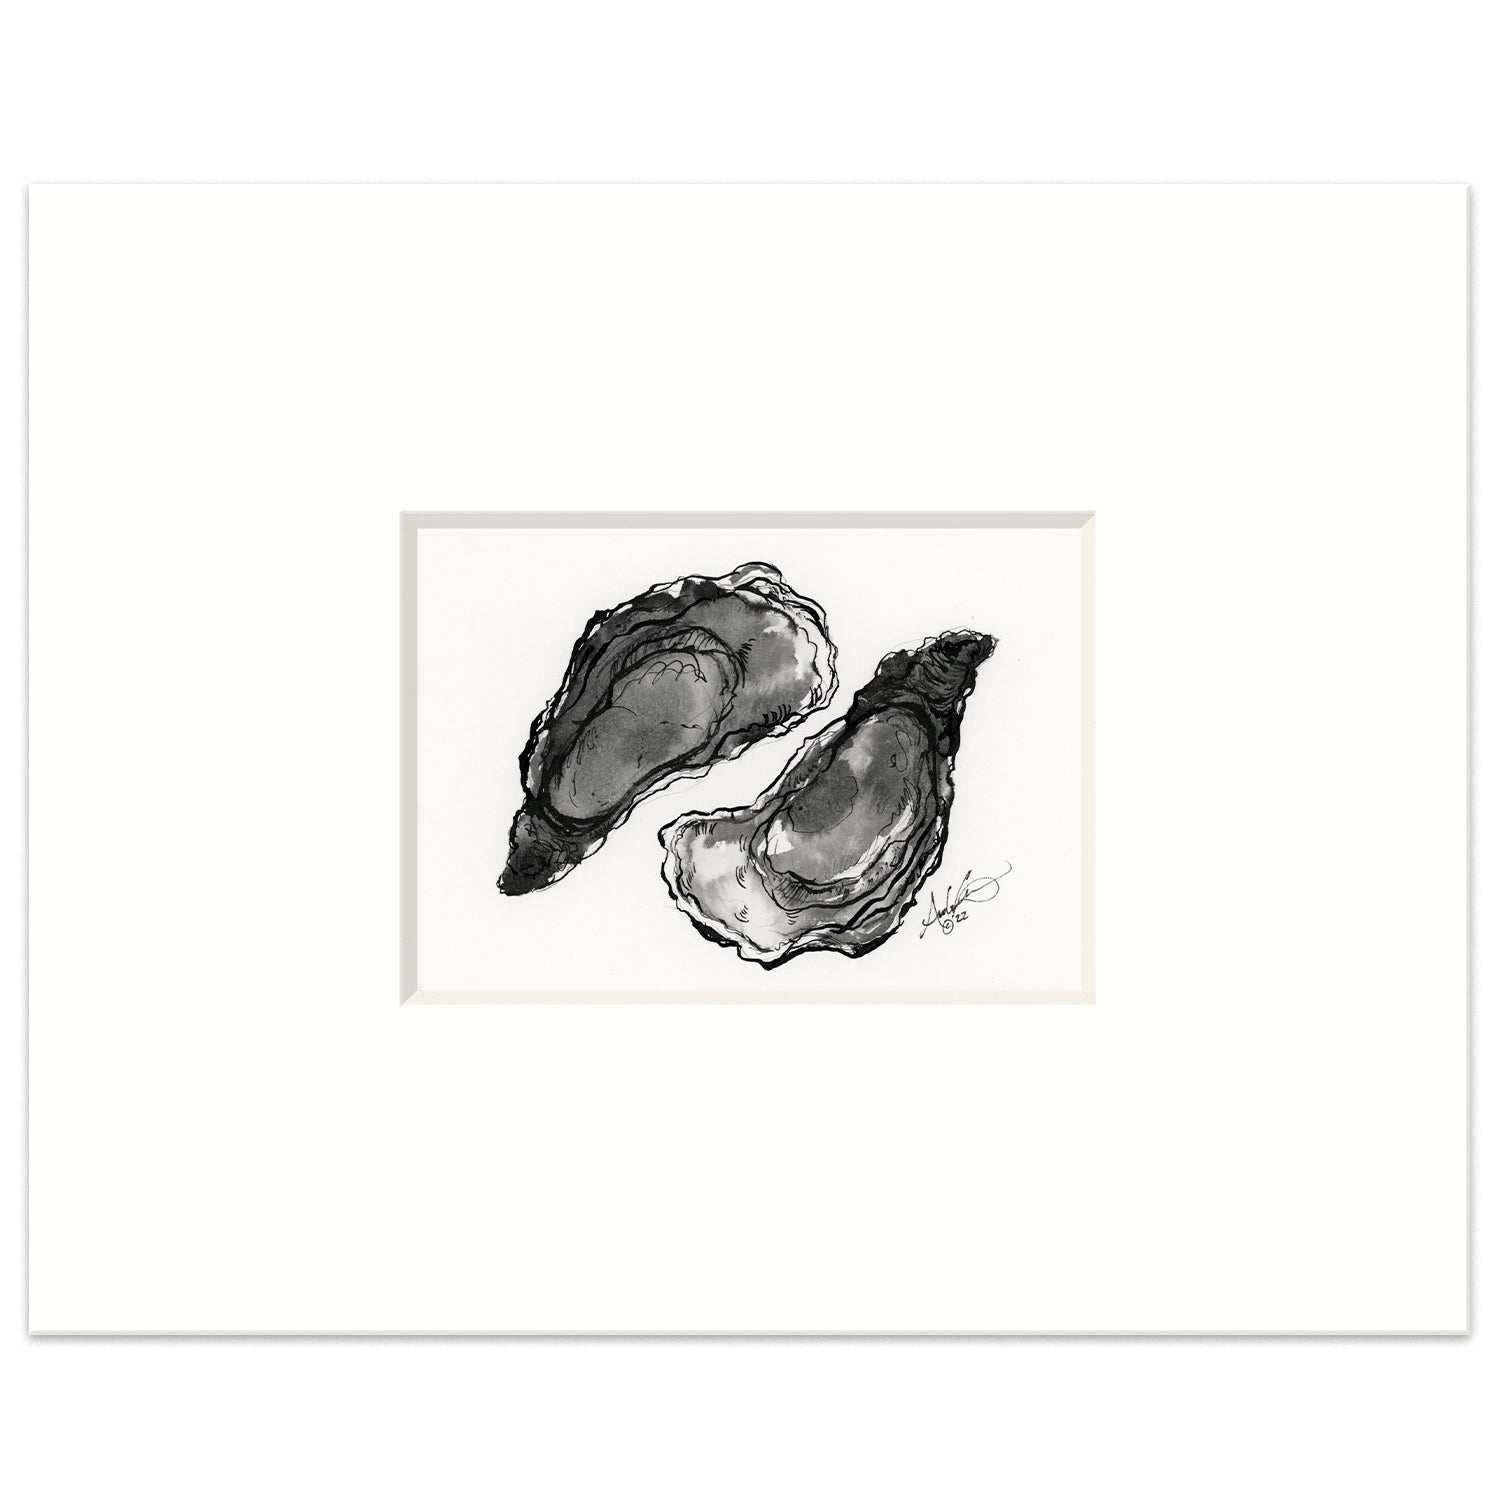 Pair of Oysters 3, 5x7” Original